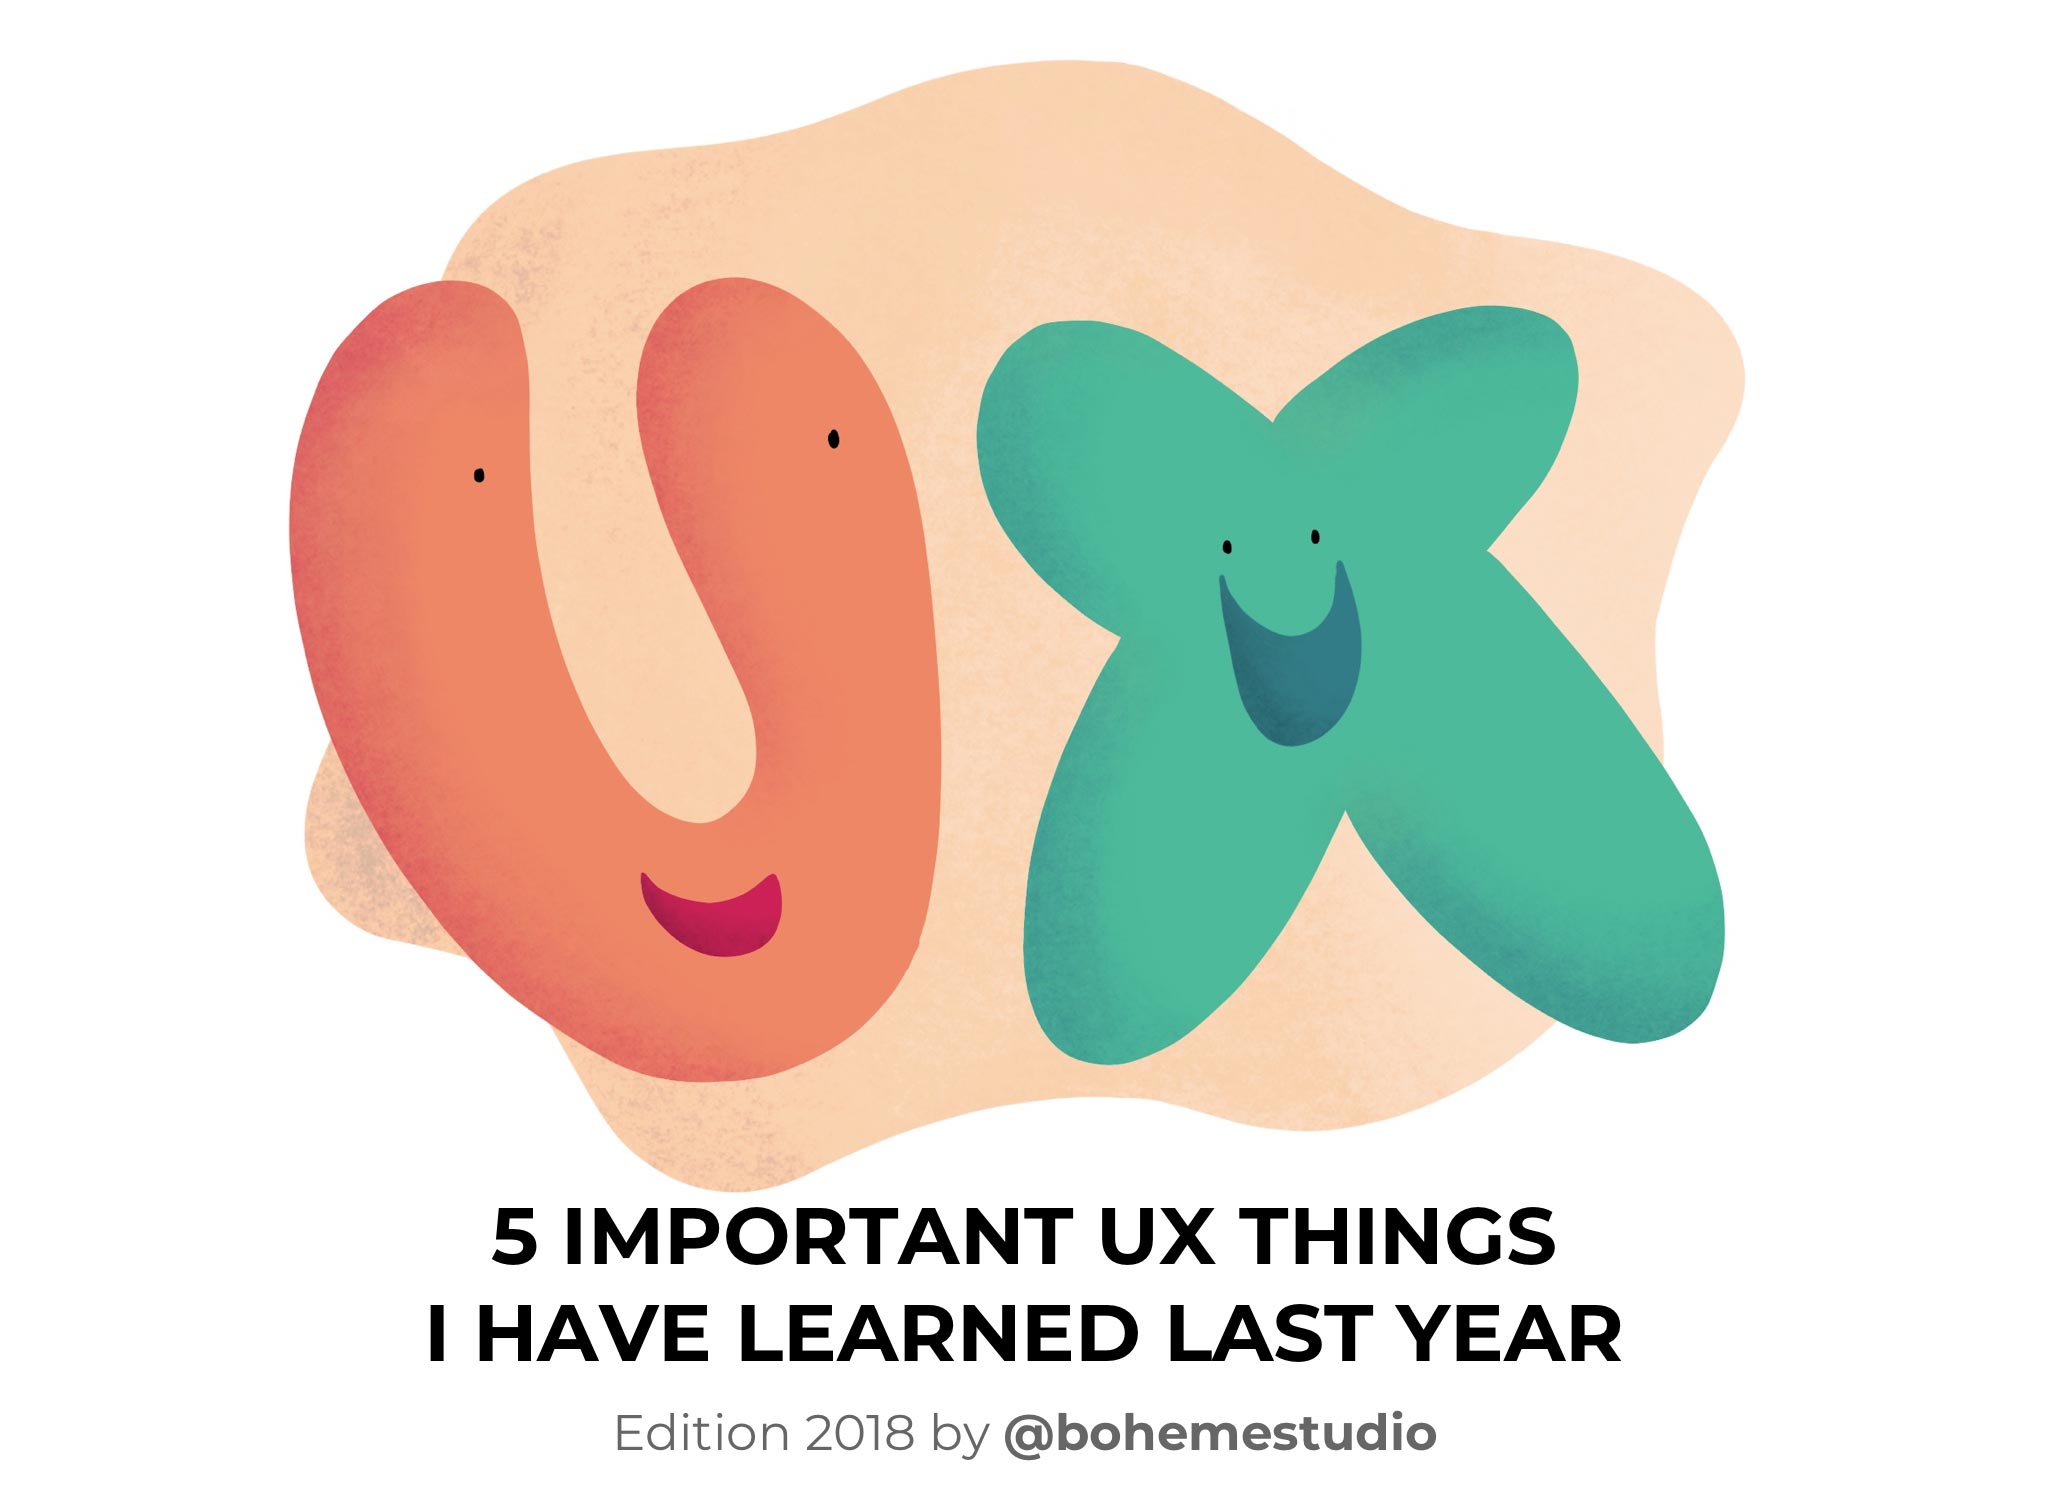 5 important UX things 2018 - Cover